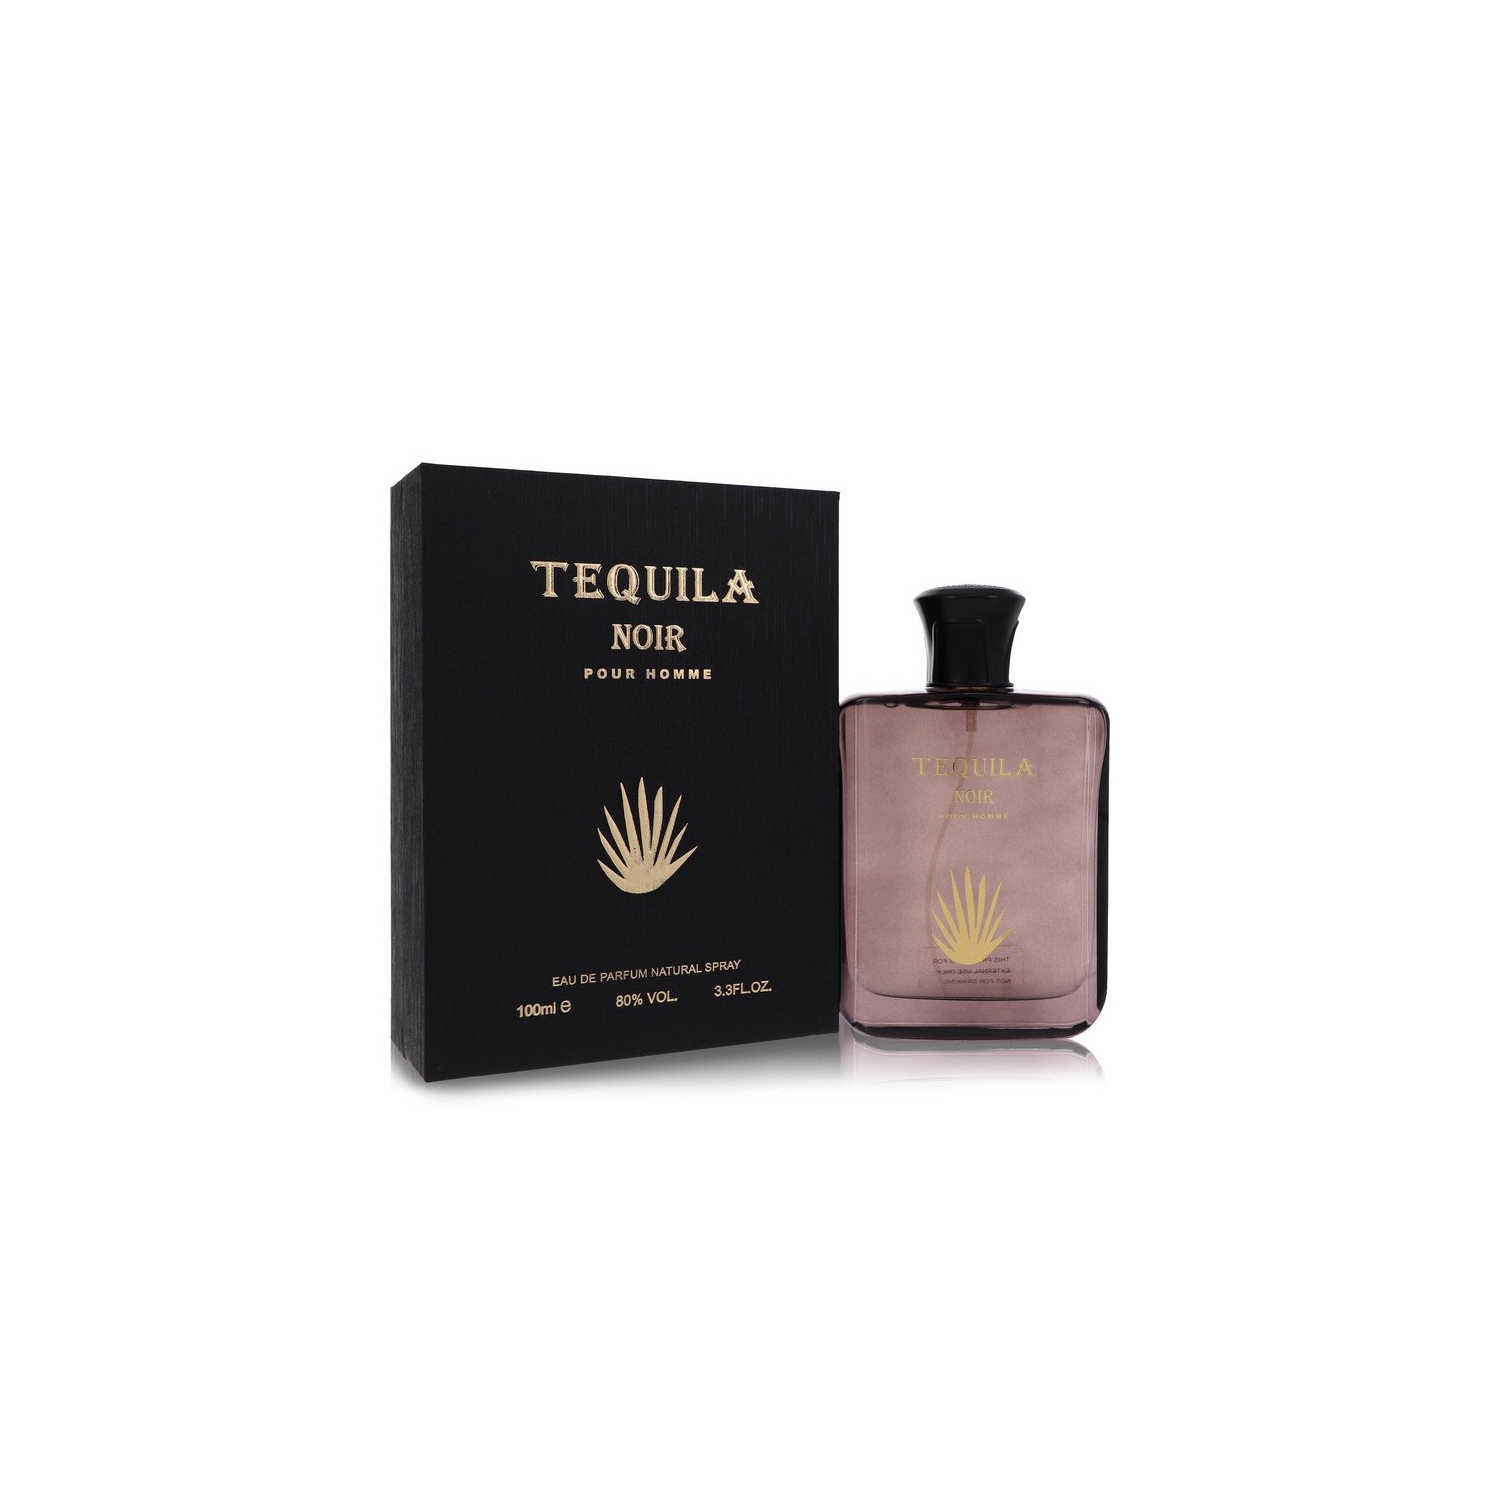 Tequila Pour Homme Noir by Tequila Perfumes